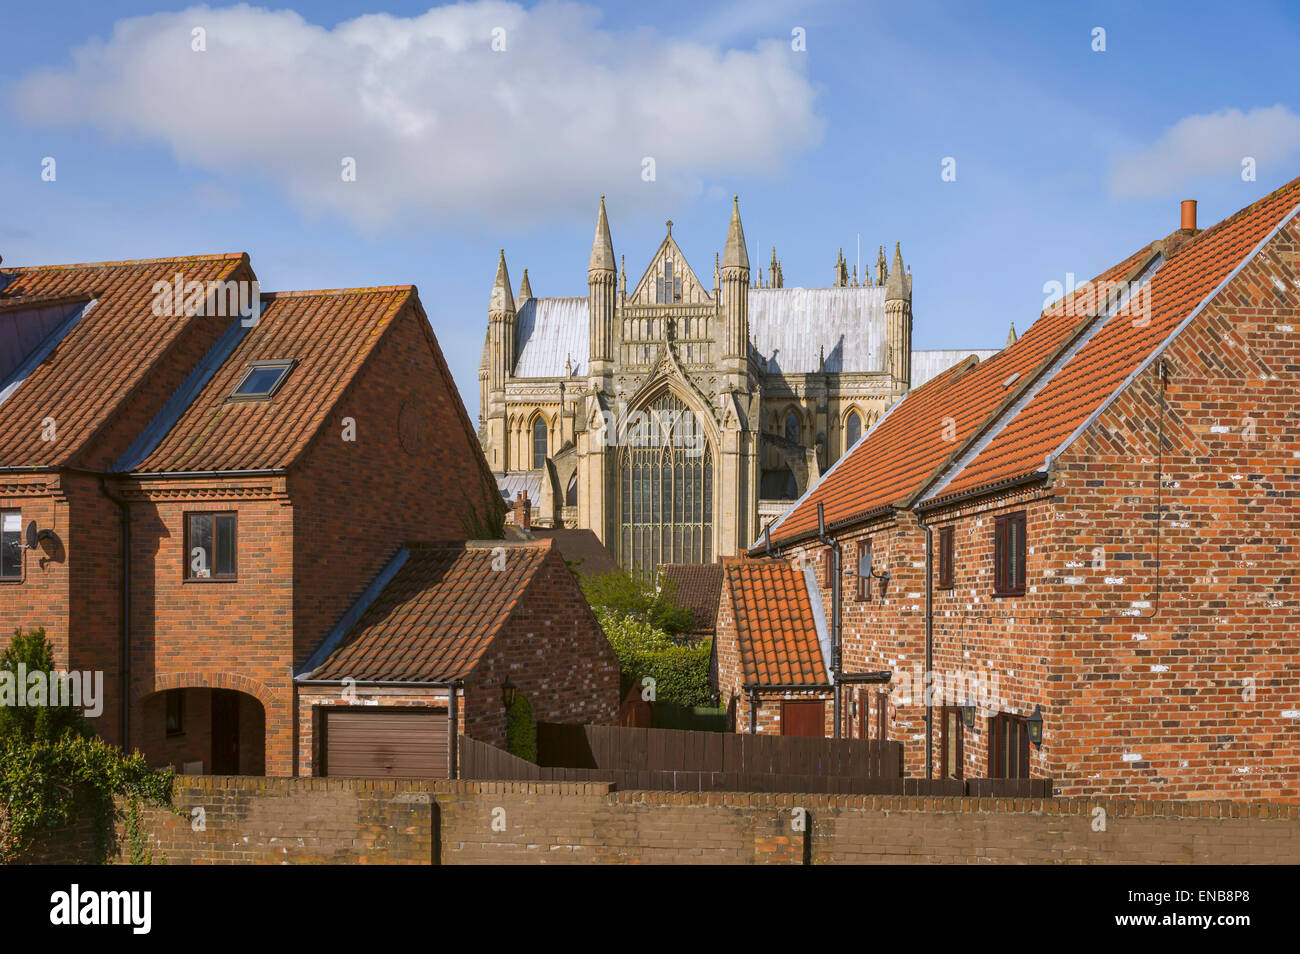 Beverley Minster and town houses on a bright spring morning in the heart of the market town of Beverley, Yorkshire, UK. Stock Photo